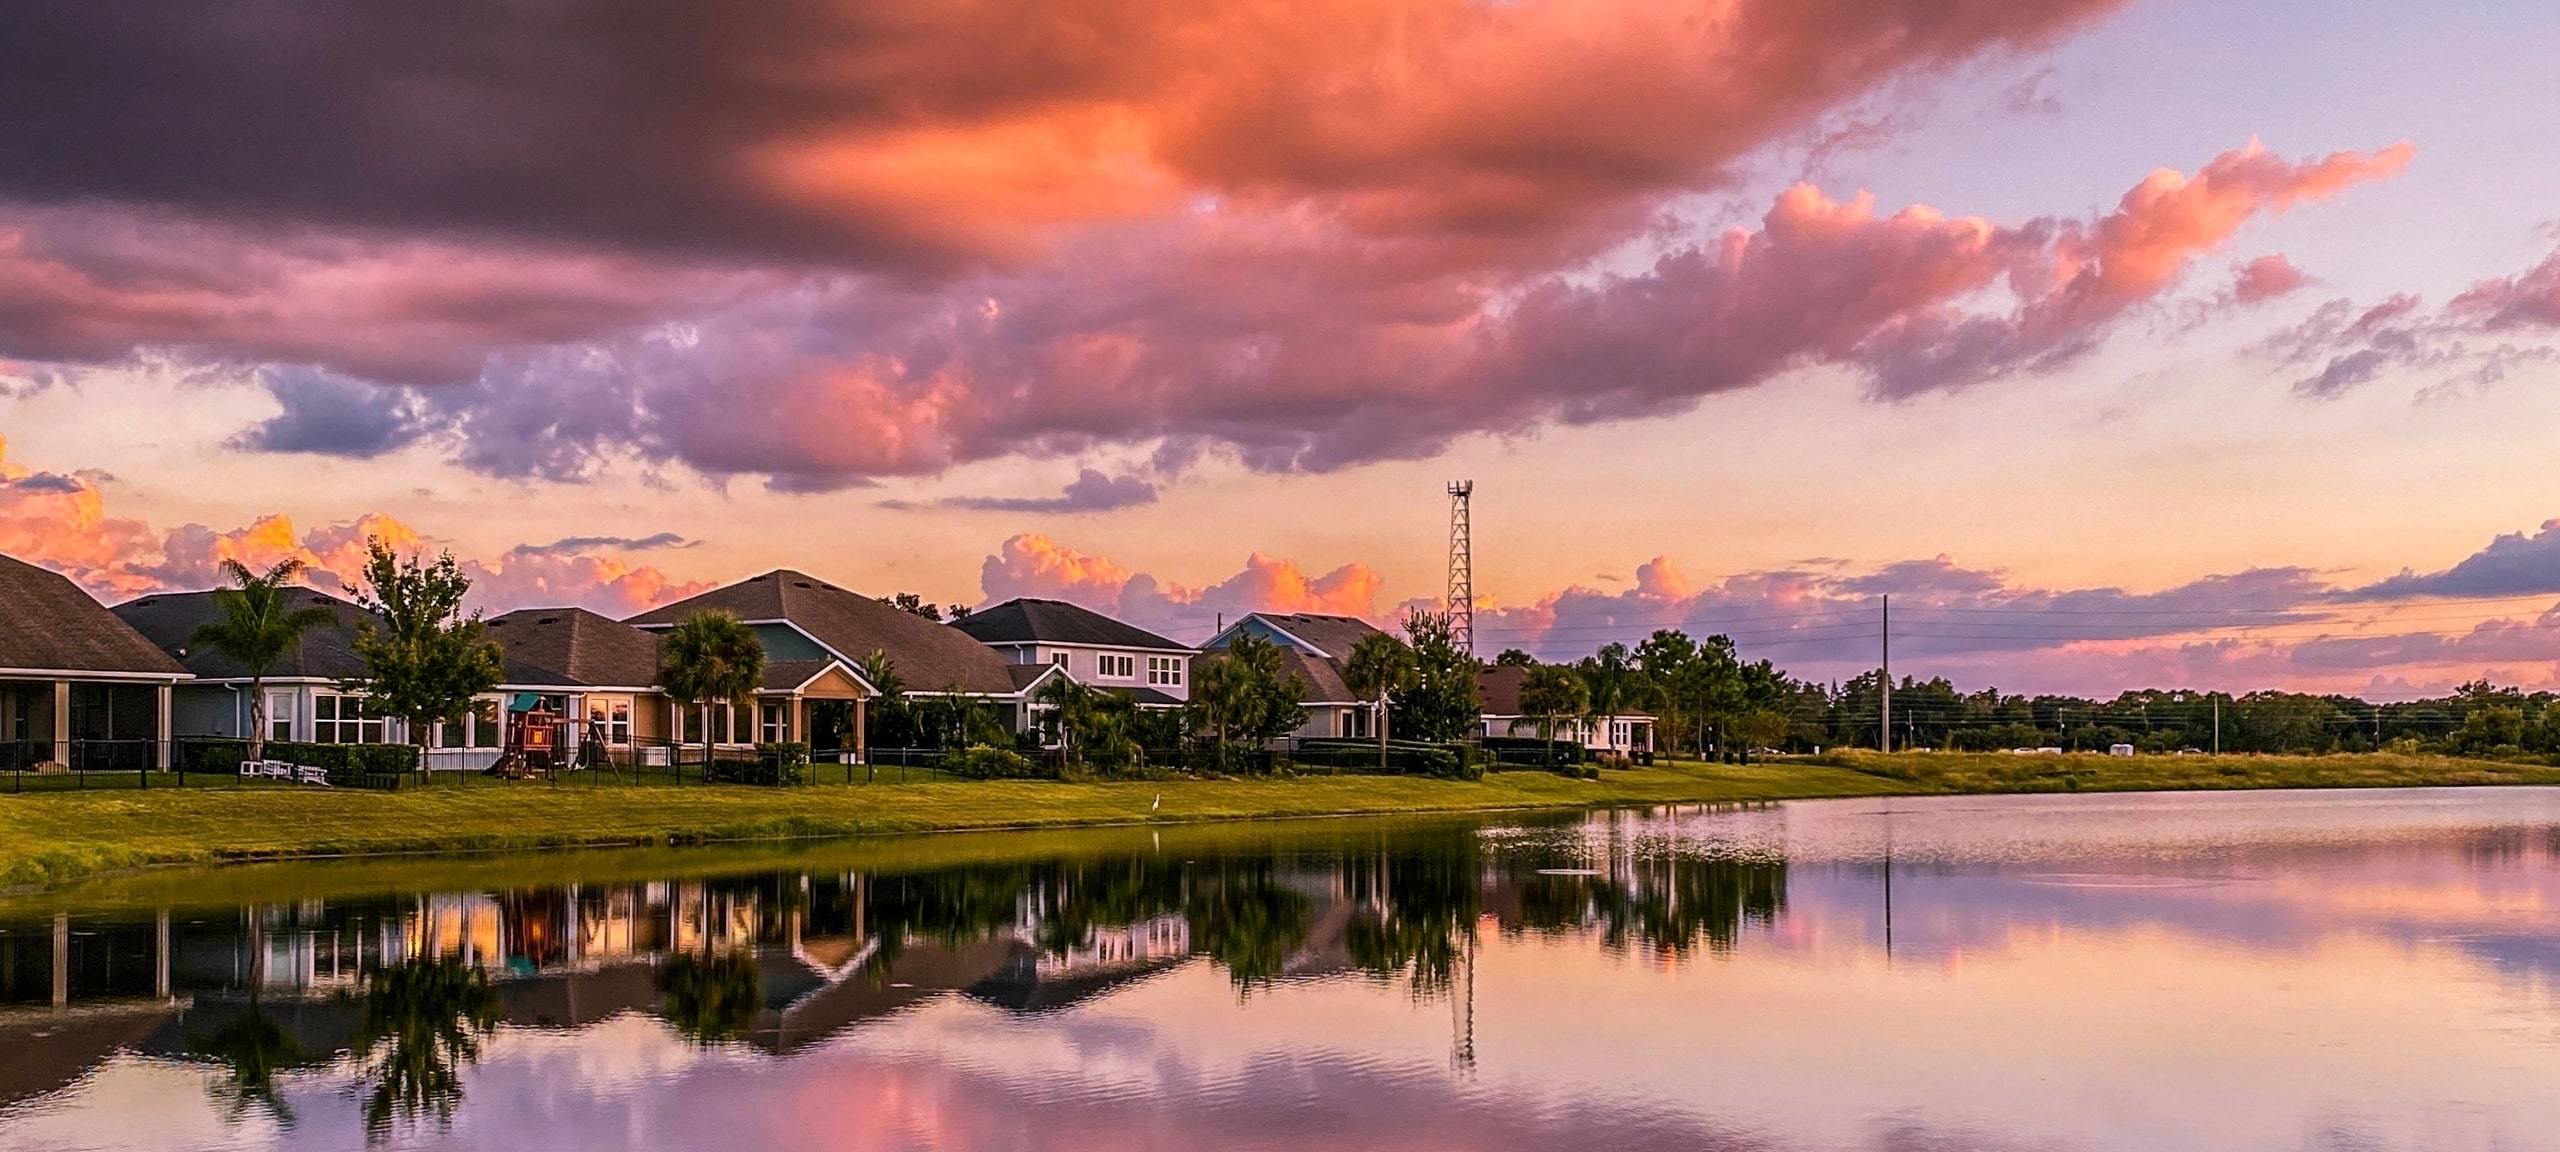 Vibrant sunset over row of waterfront homes, Orlando, FL